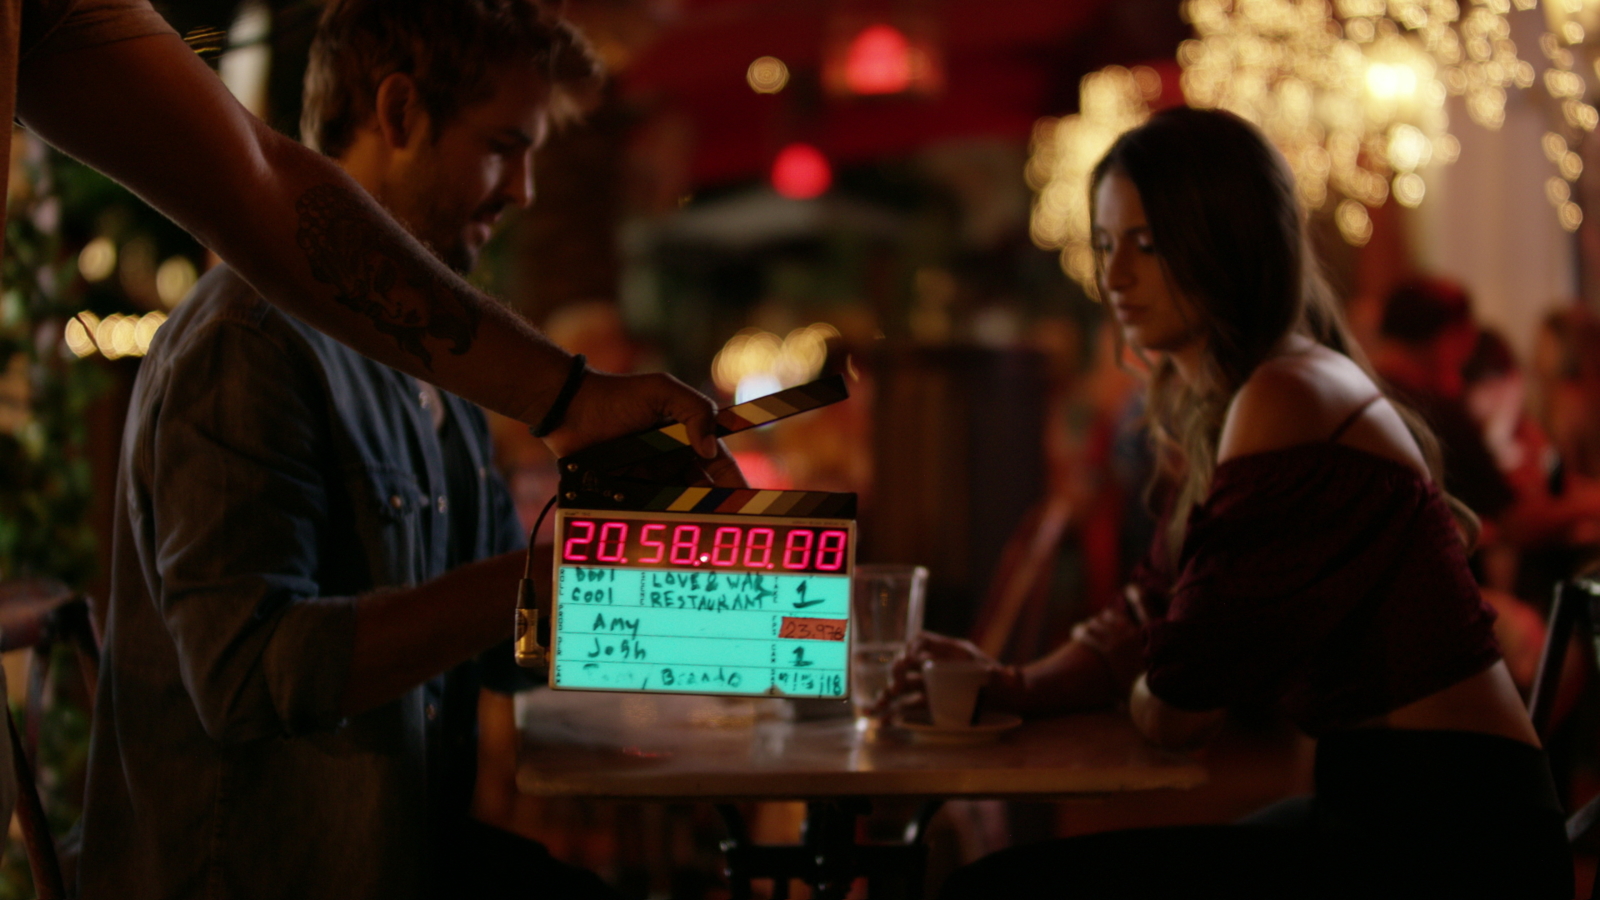 Digital clapboard being used in front of man and woman on a restaurant set